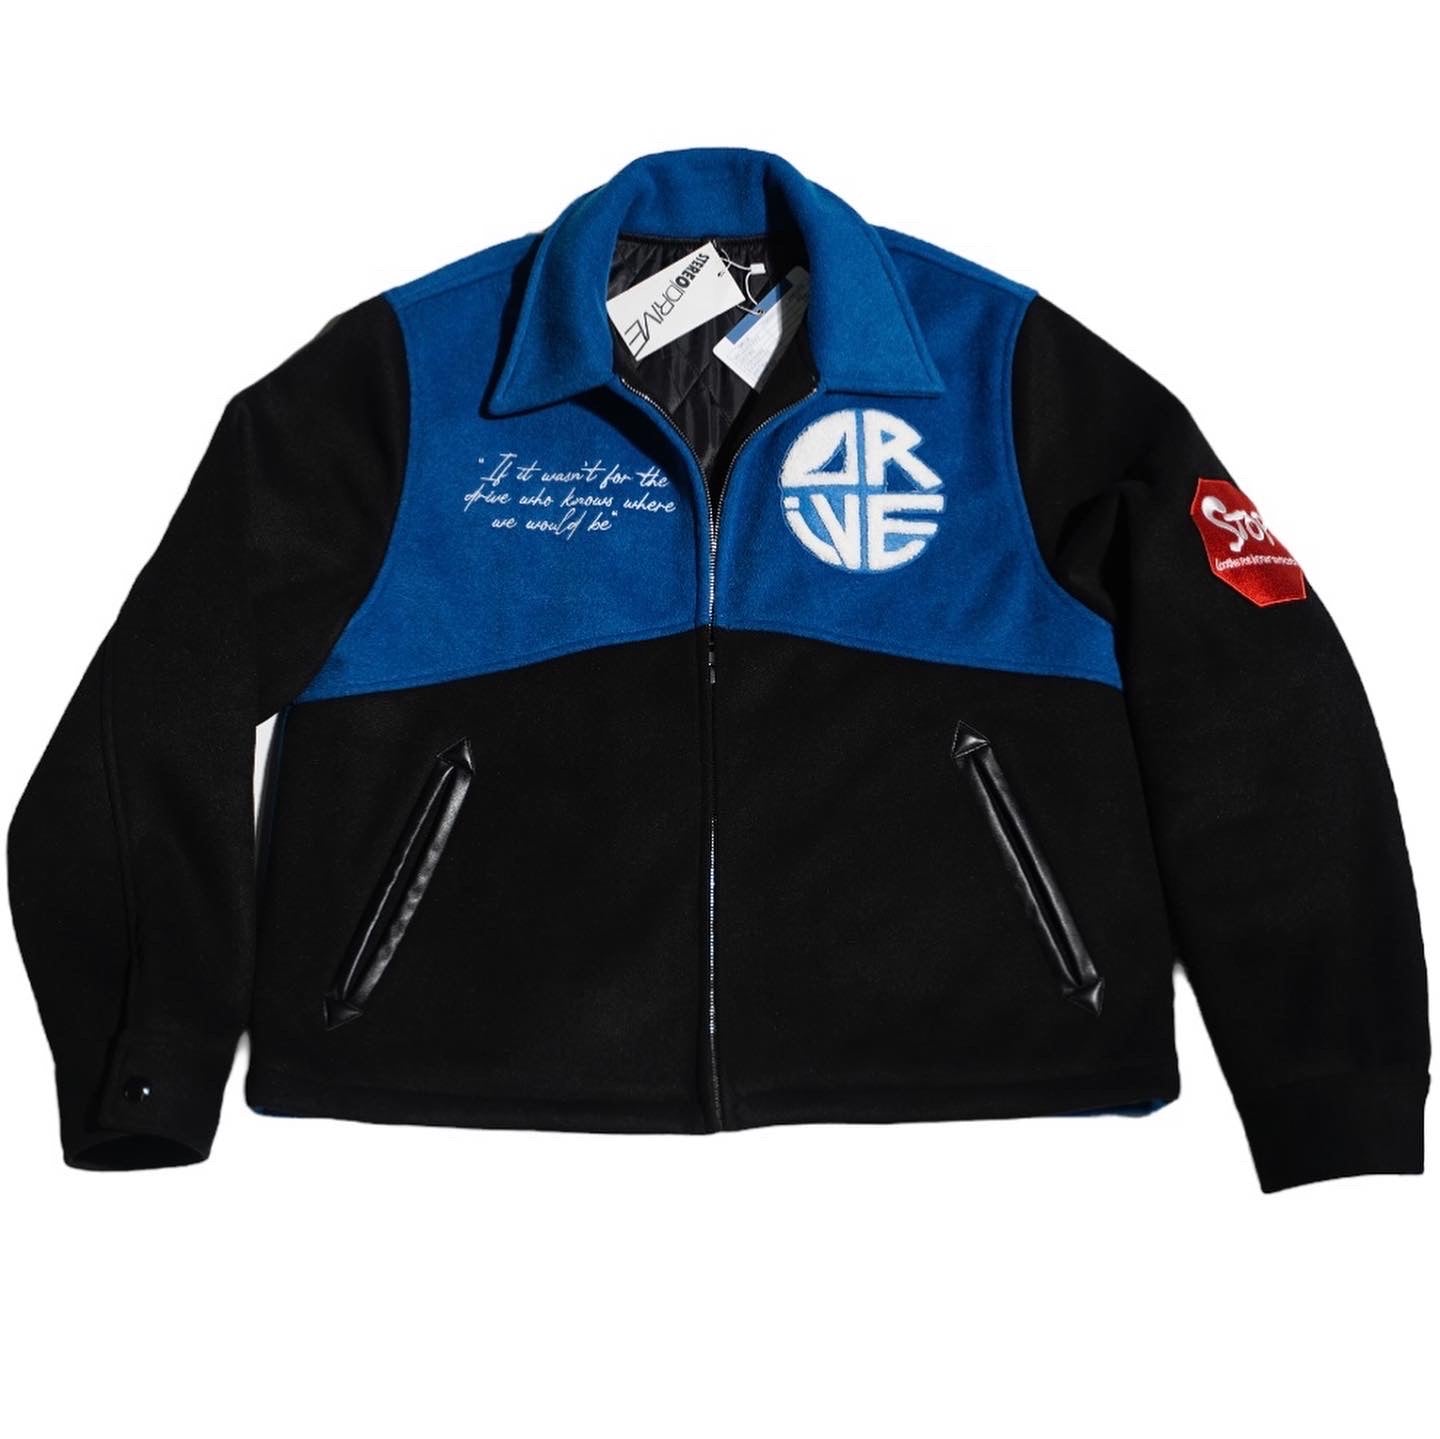 WOMEN'S “Free Your Drive” Jacket